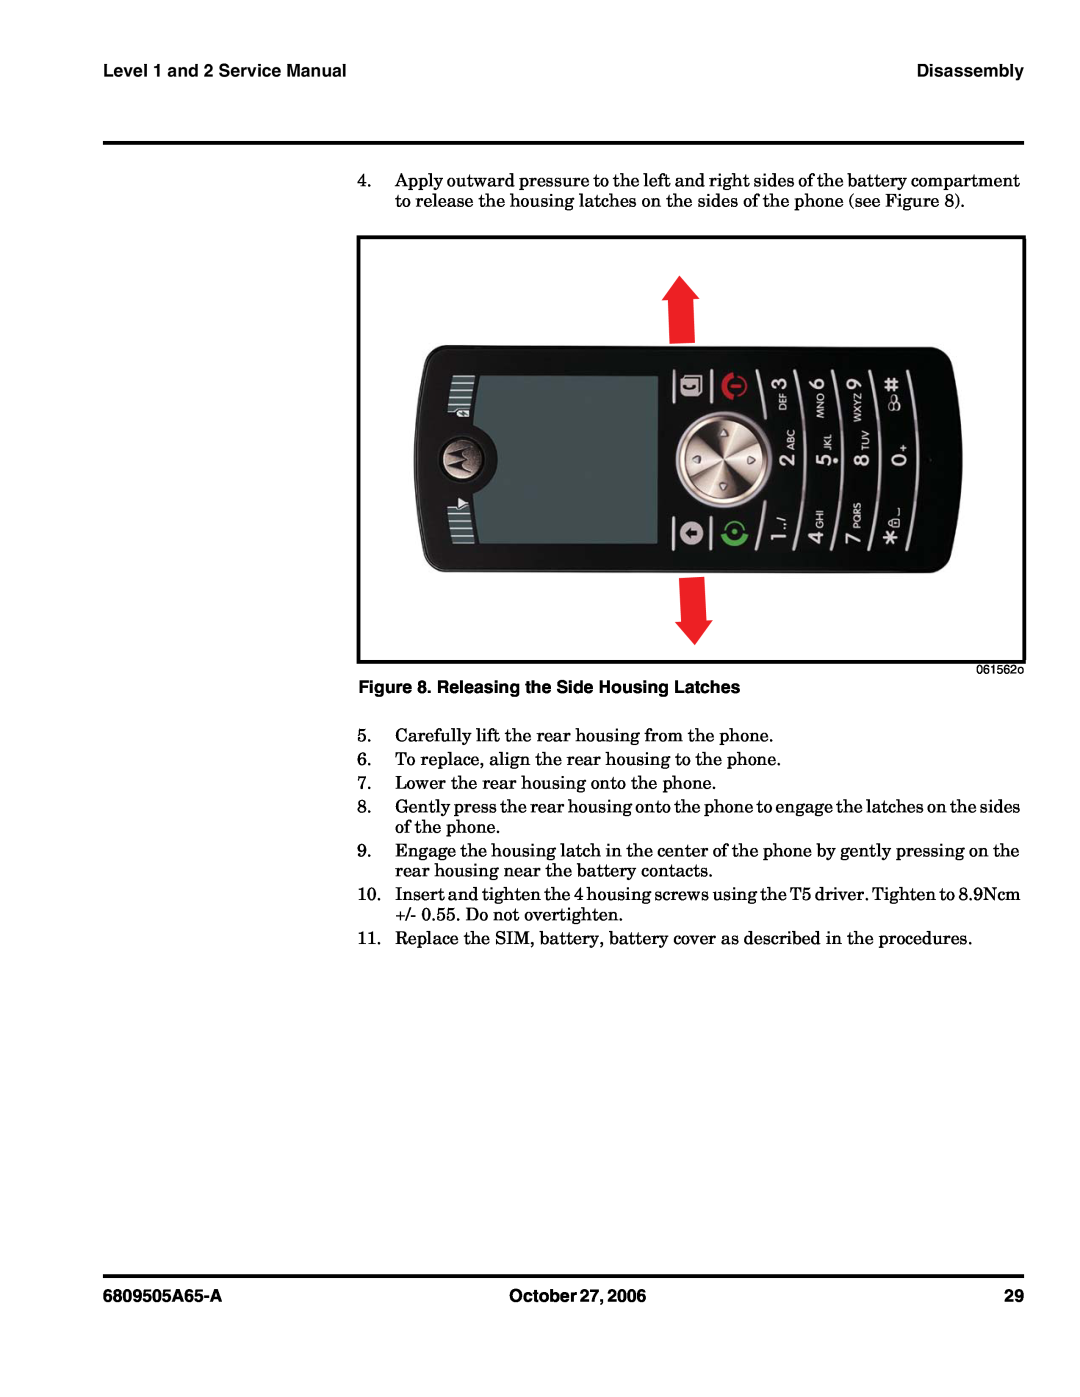 Motorola F3 Releasing the Side Housing Latches, Level 1 and 2 Service Manual, Disassembly, 6809505A65-A, October 27 